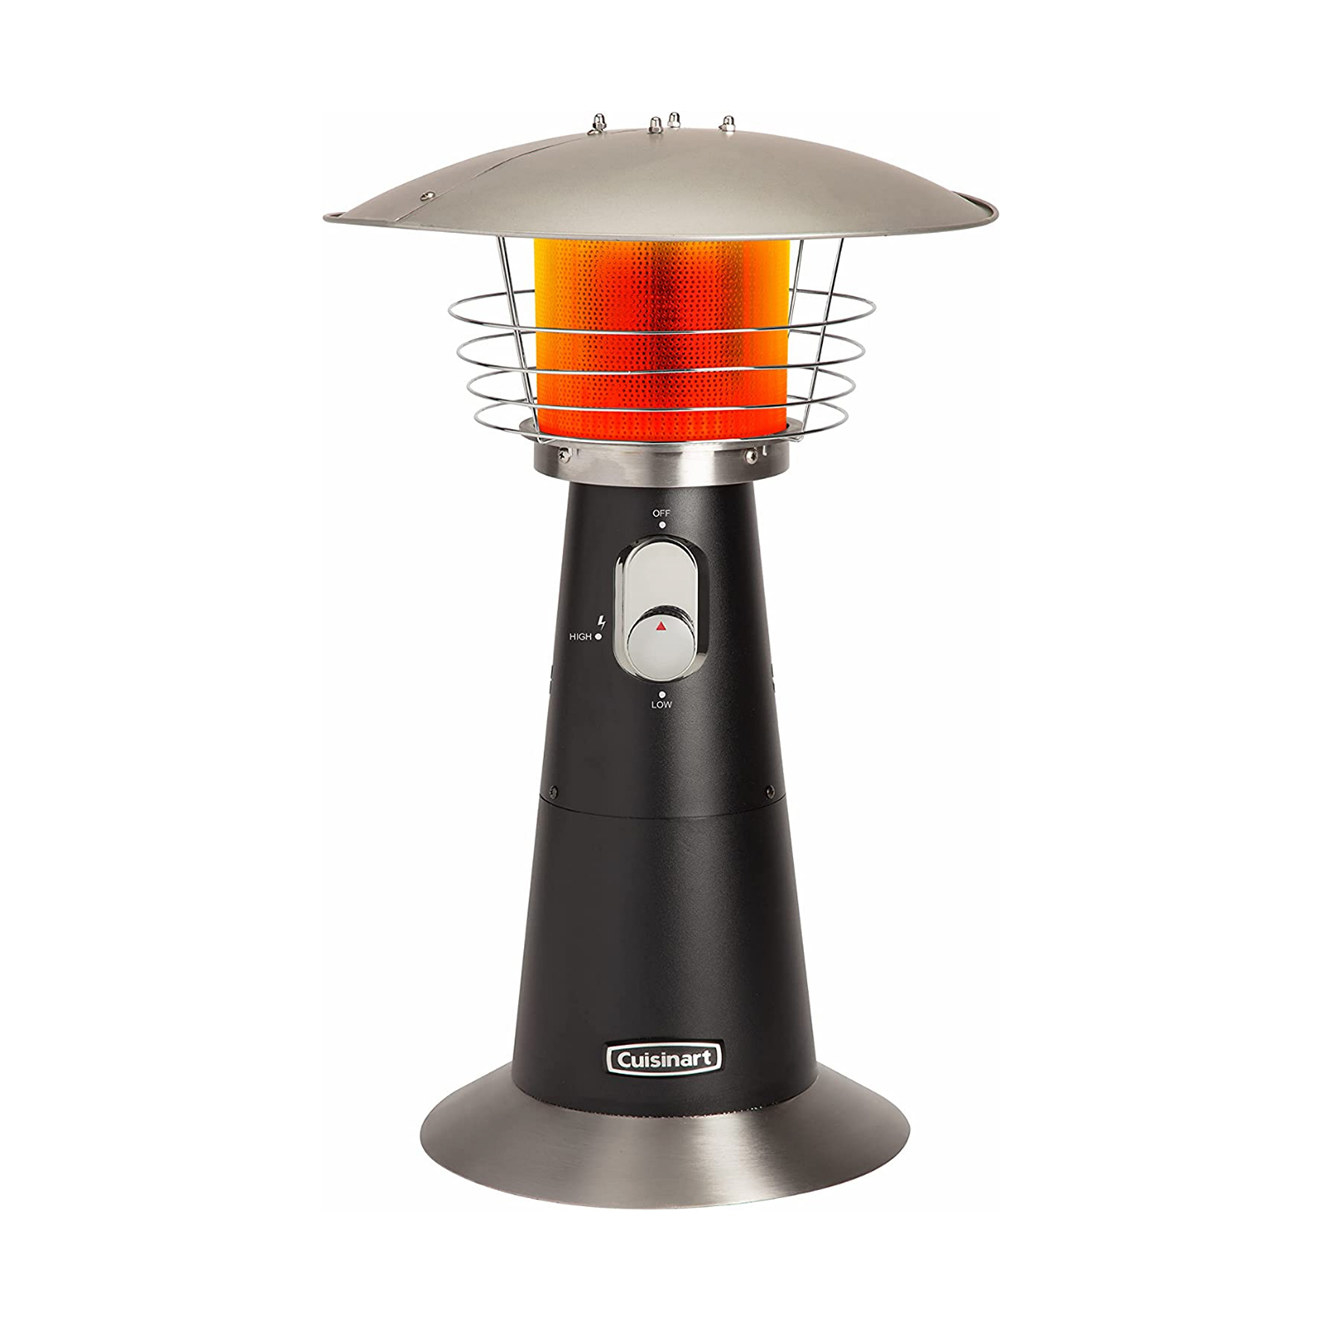 A tabletop outdoor propane heater from Cuisinart